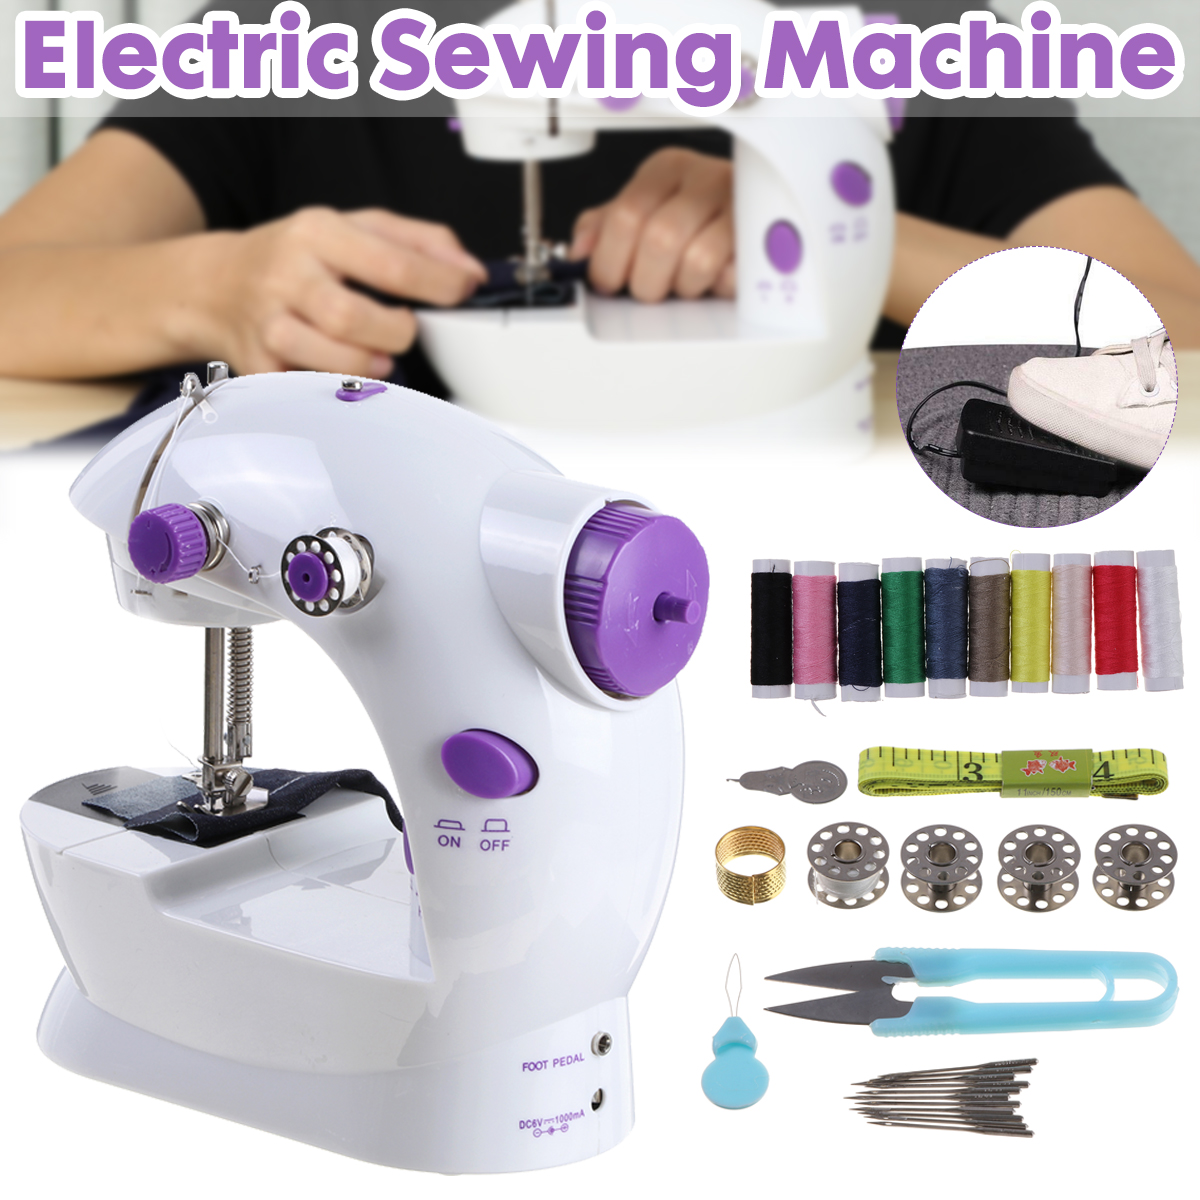 Rechargeable-Portable-Electric-Sewing-Machine-Multi-function-Household-Sewing-Machine-1753879-1